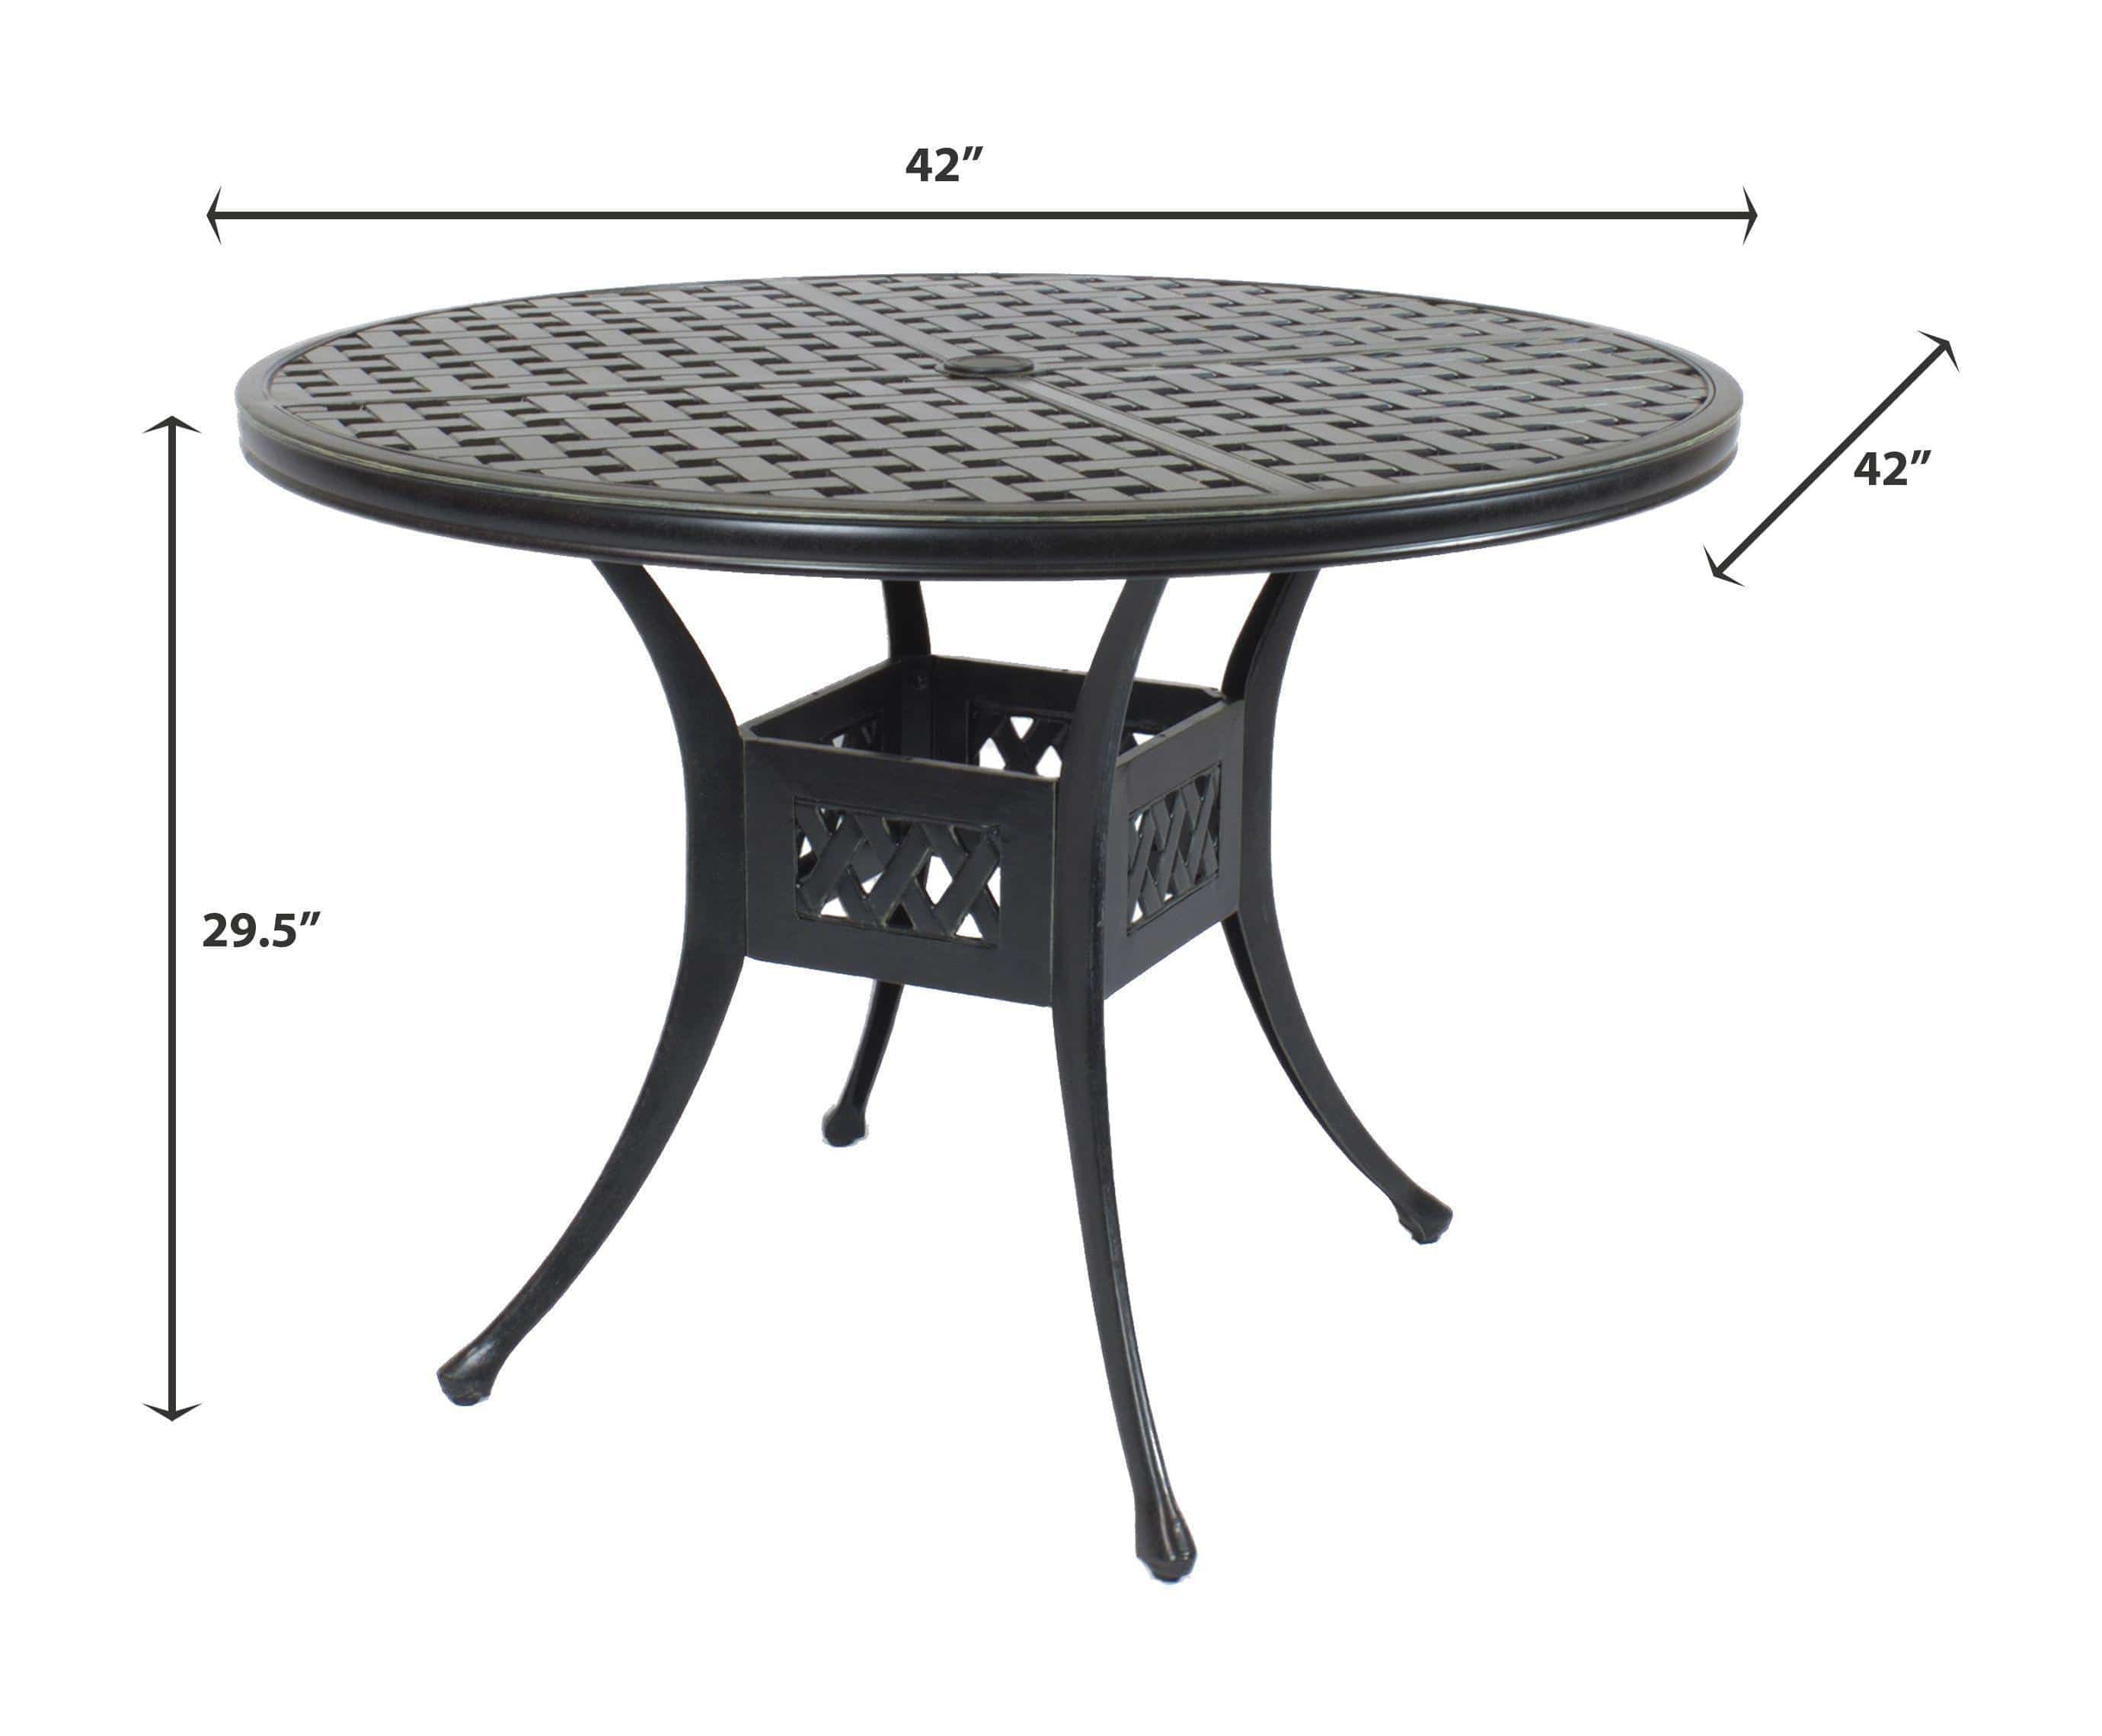 Lawton Casual Comfort Outdoor Dining Table Lawton Casual Comfort - Round Dining Table